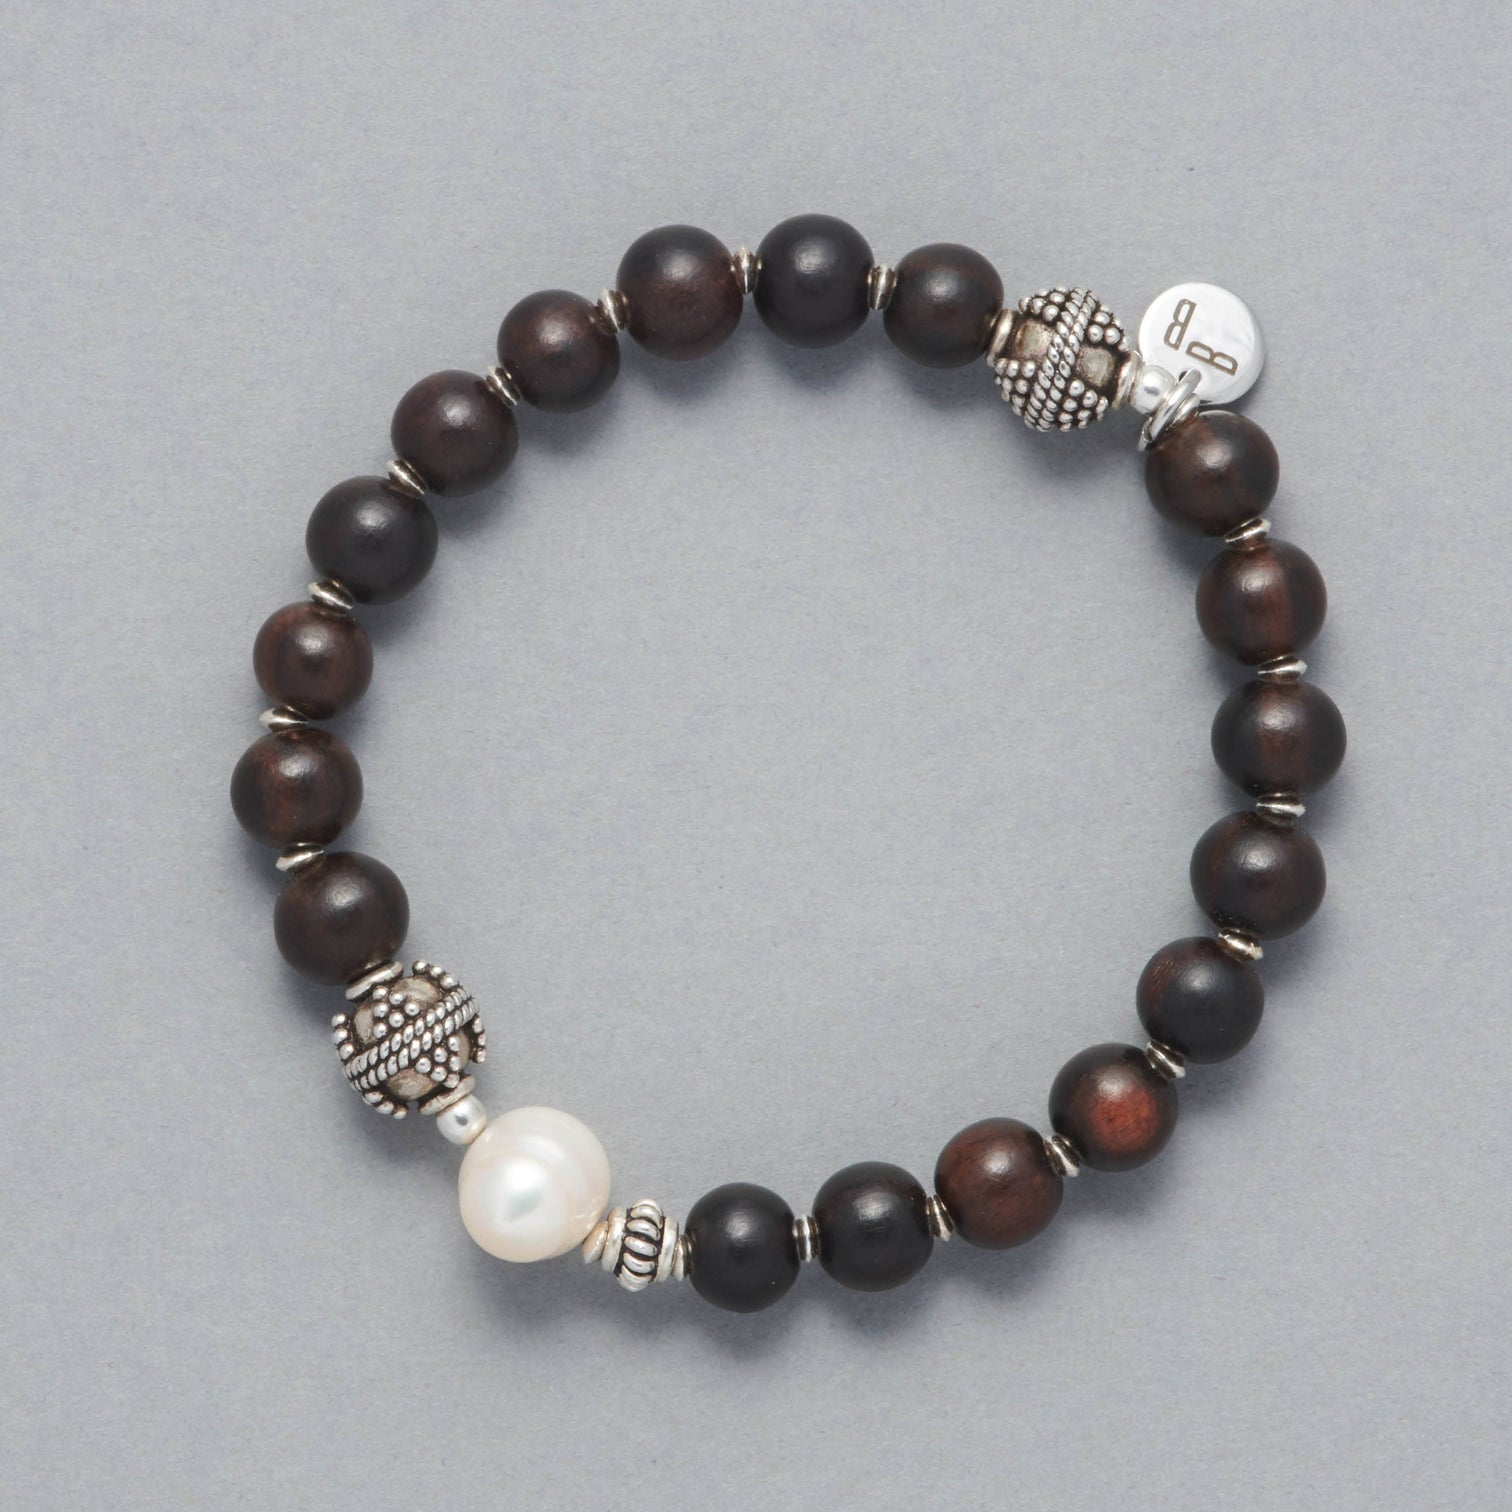 Product shot of the Ebony Bracelet made with Ebony Wood, a Cultured Freshwater Pearl and Sterling Silver Elements.